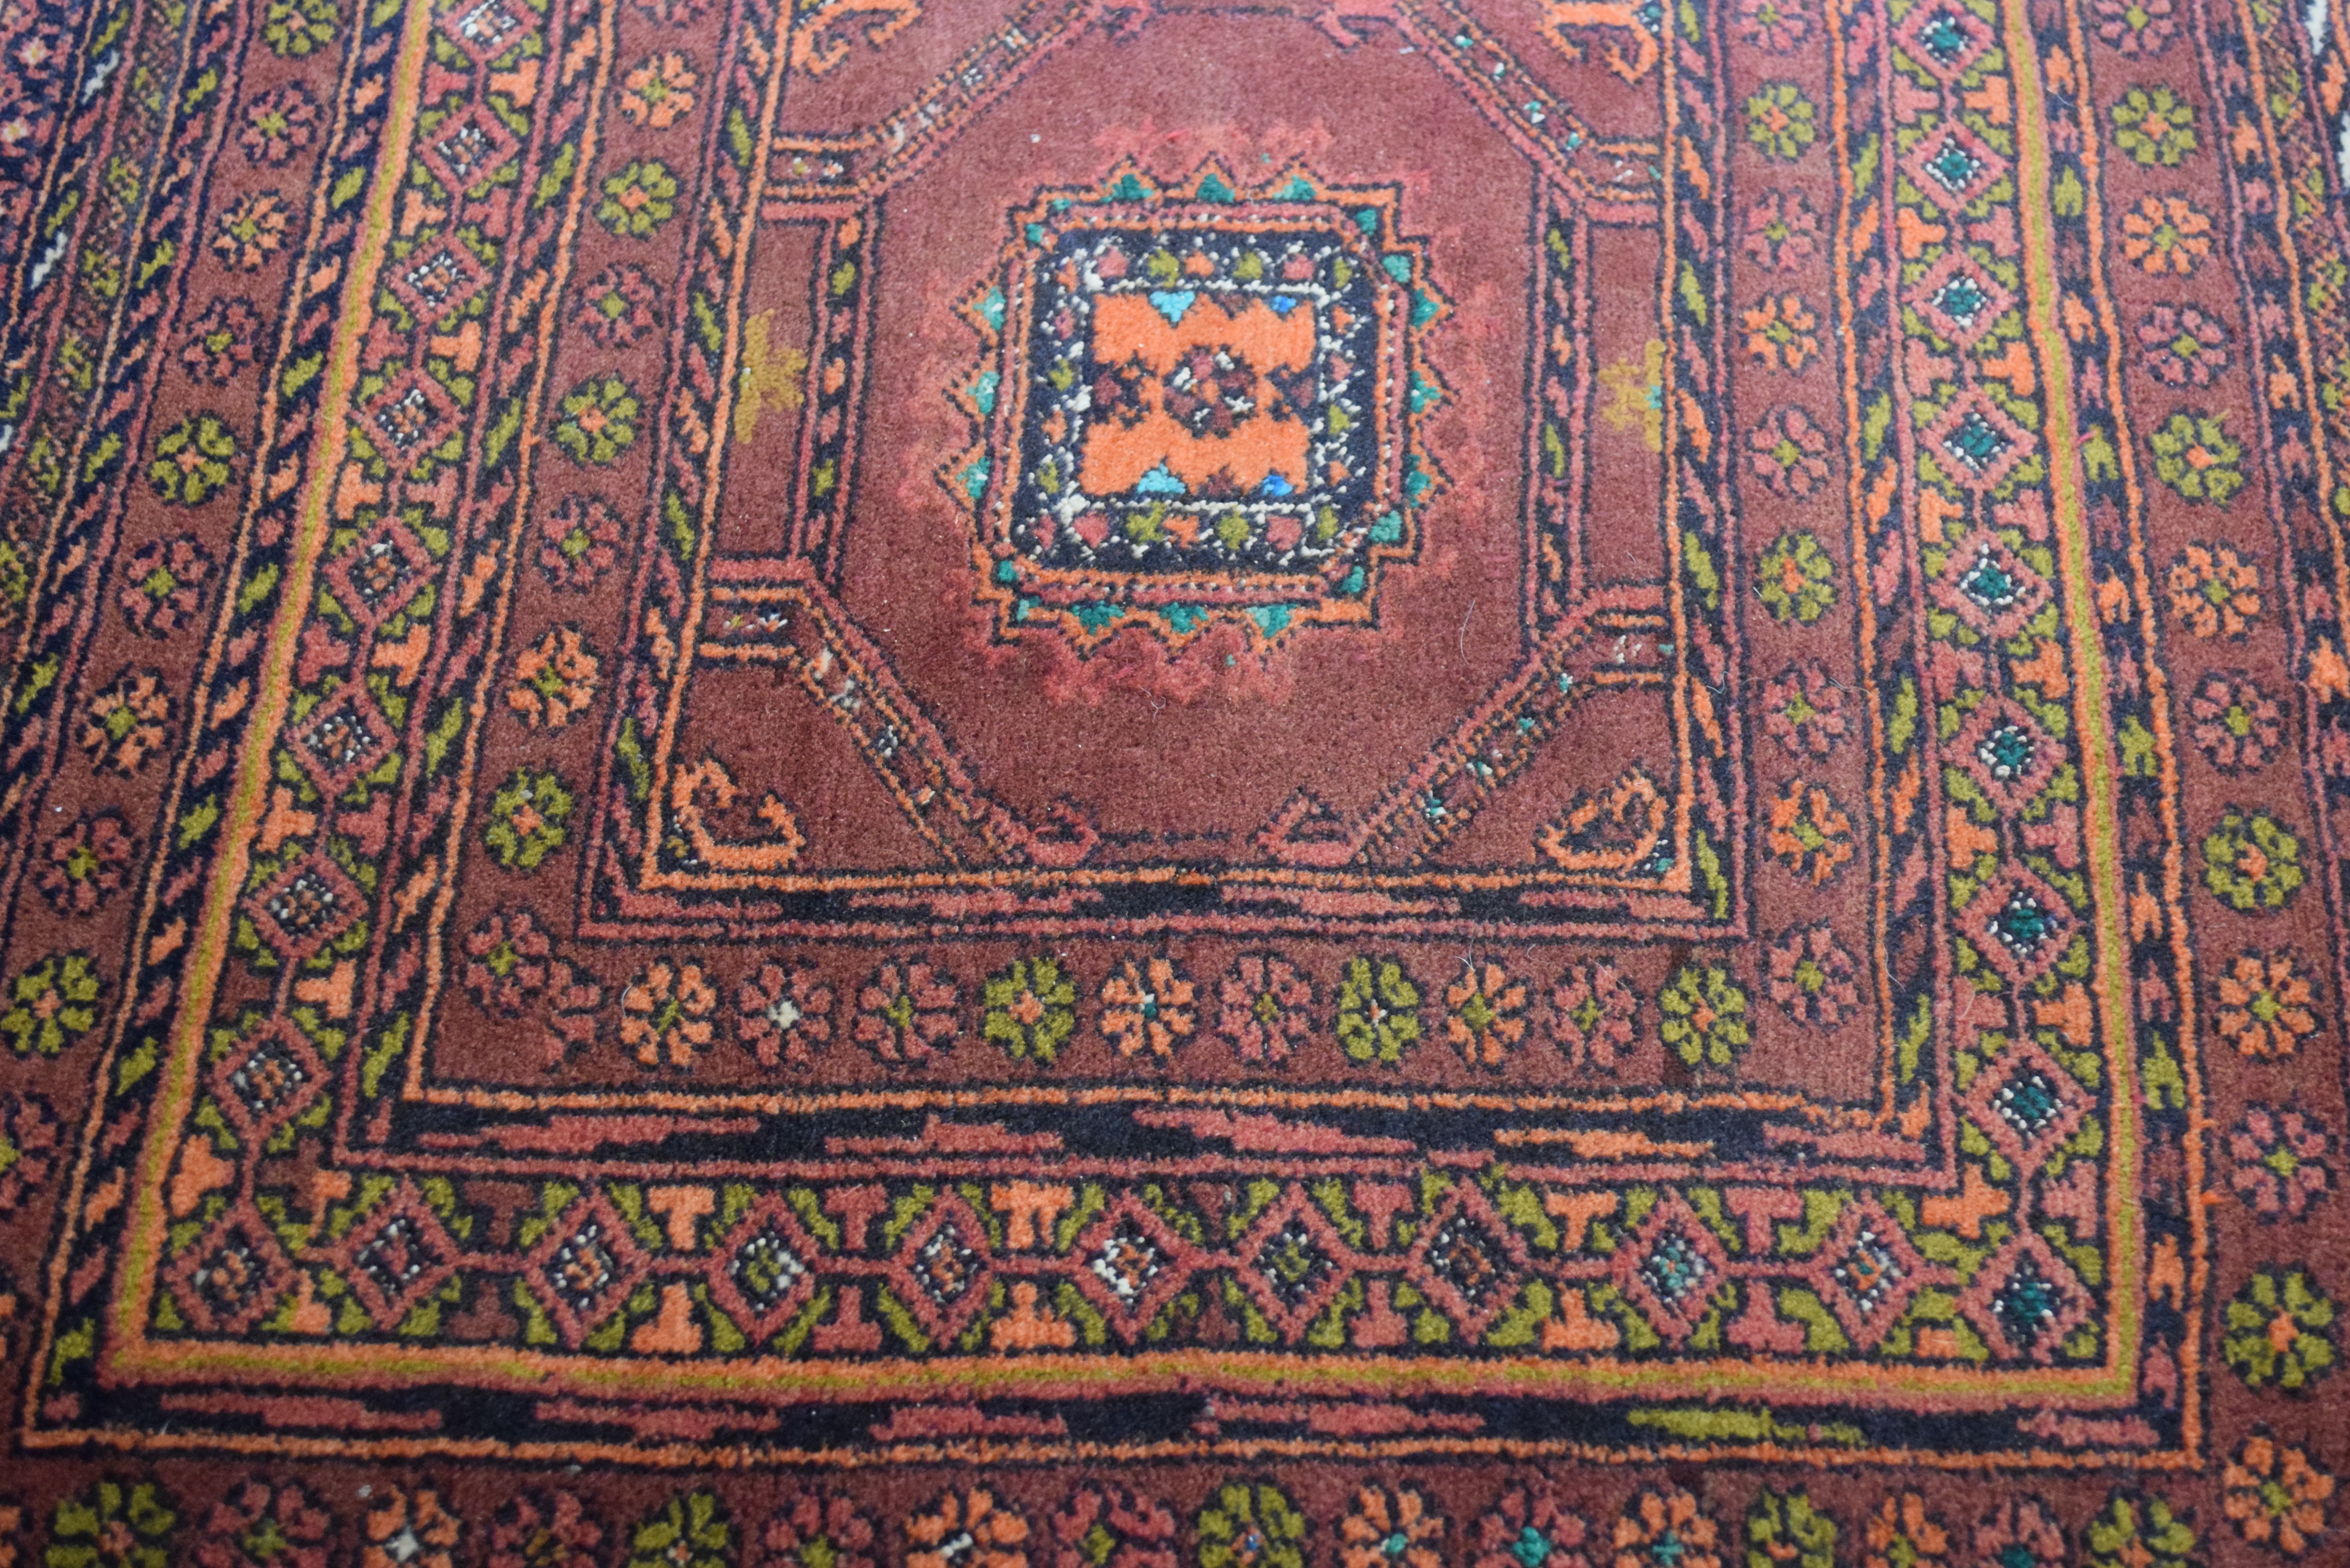 Small Middle Eastern wool carpet or prayer mat decorated with central lozenge on a principally red - Image 4 of 4